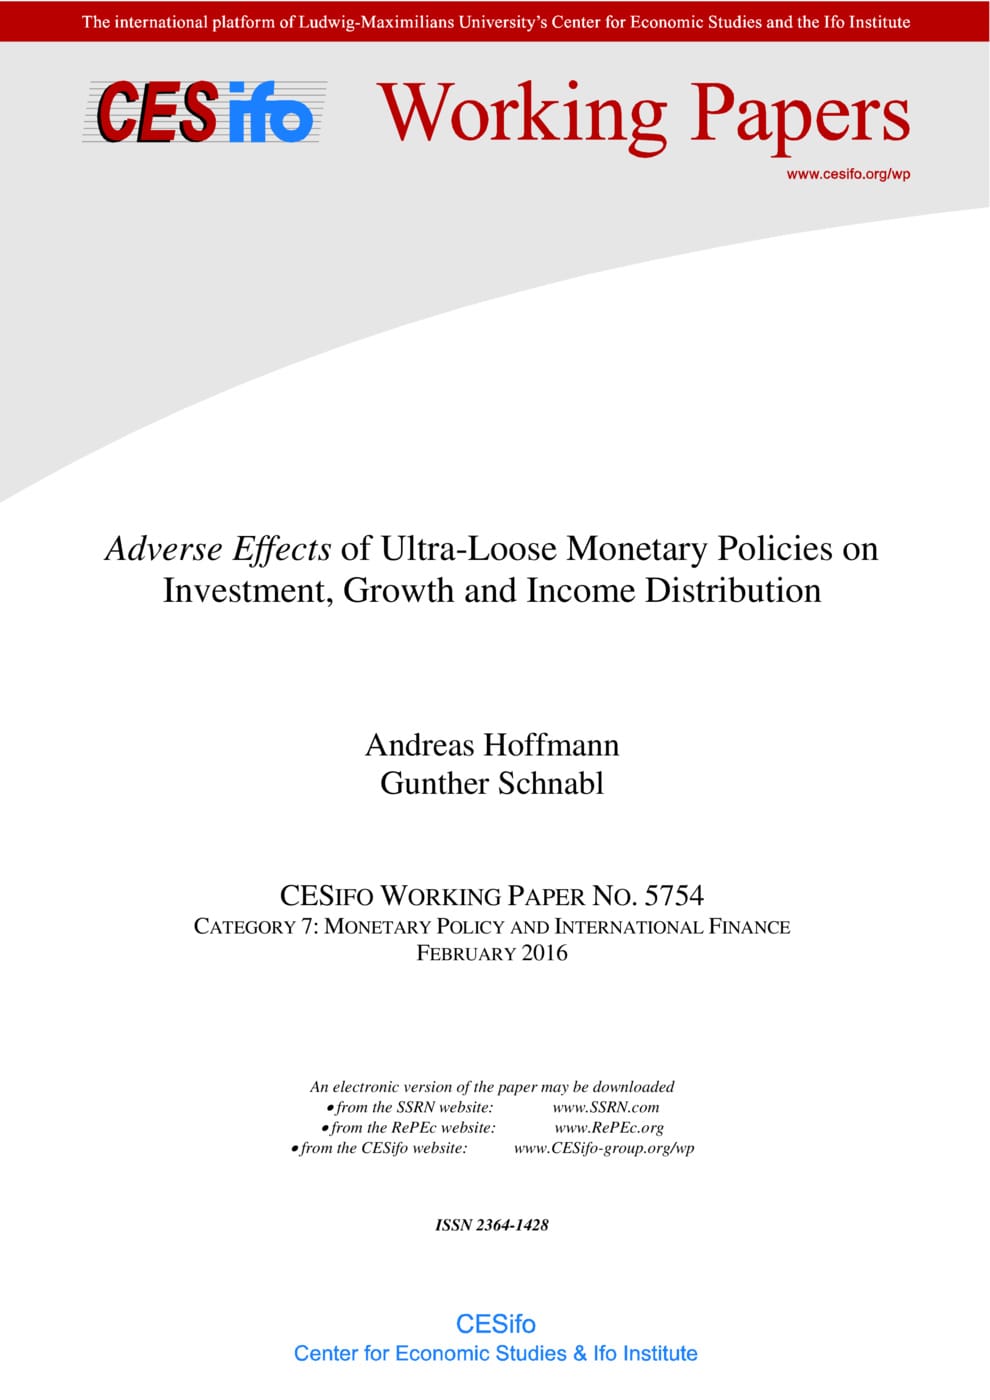 Adverse Effects of Ultra-Loose Monetary Policies on Investment